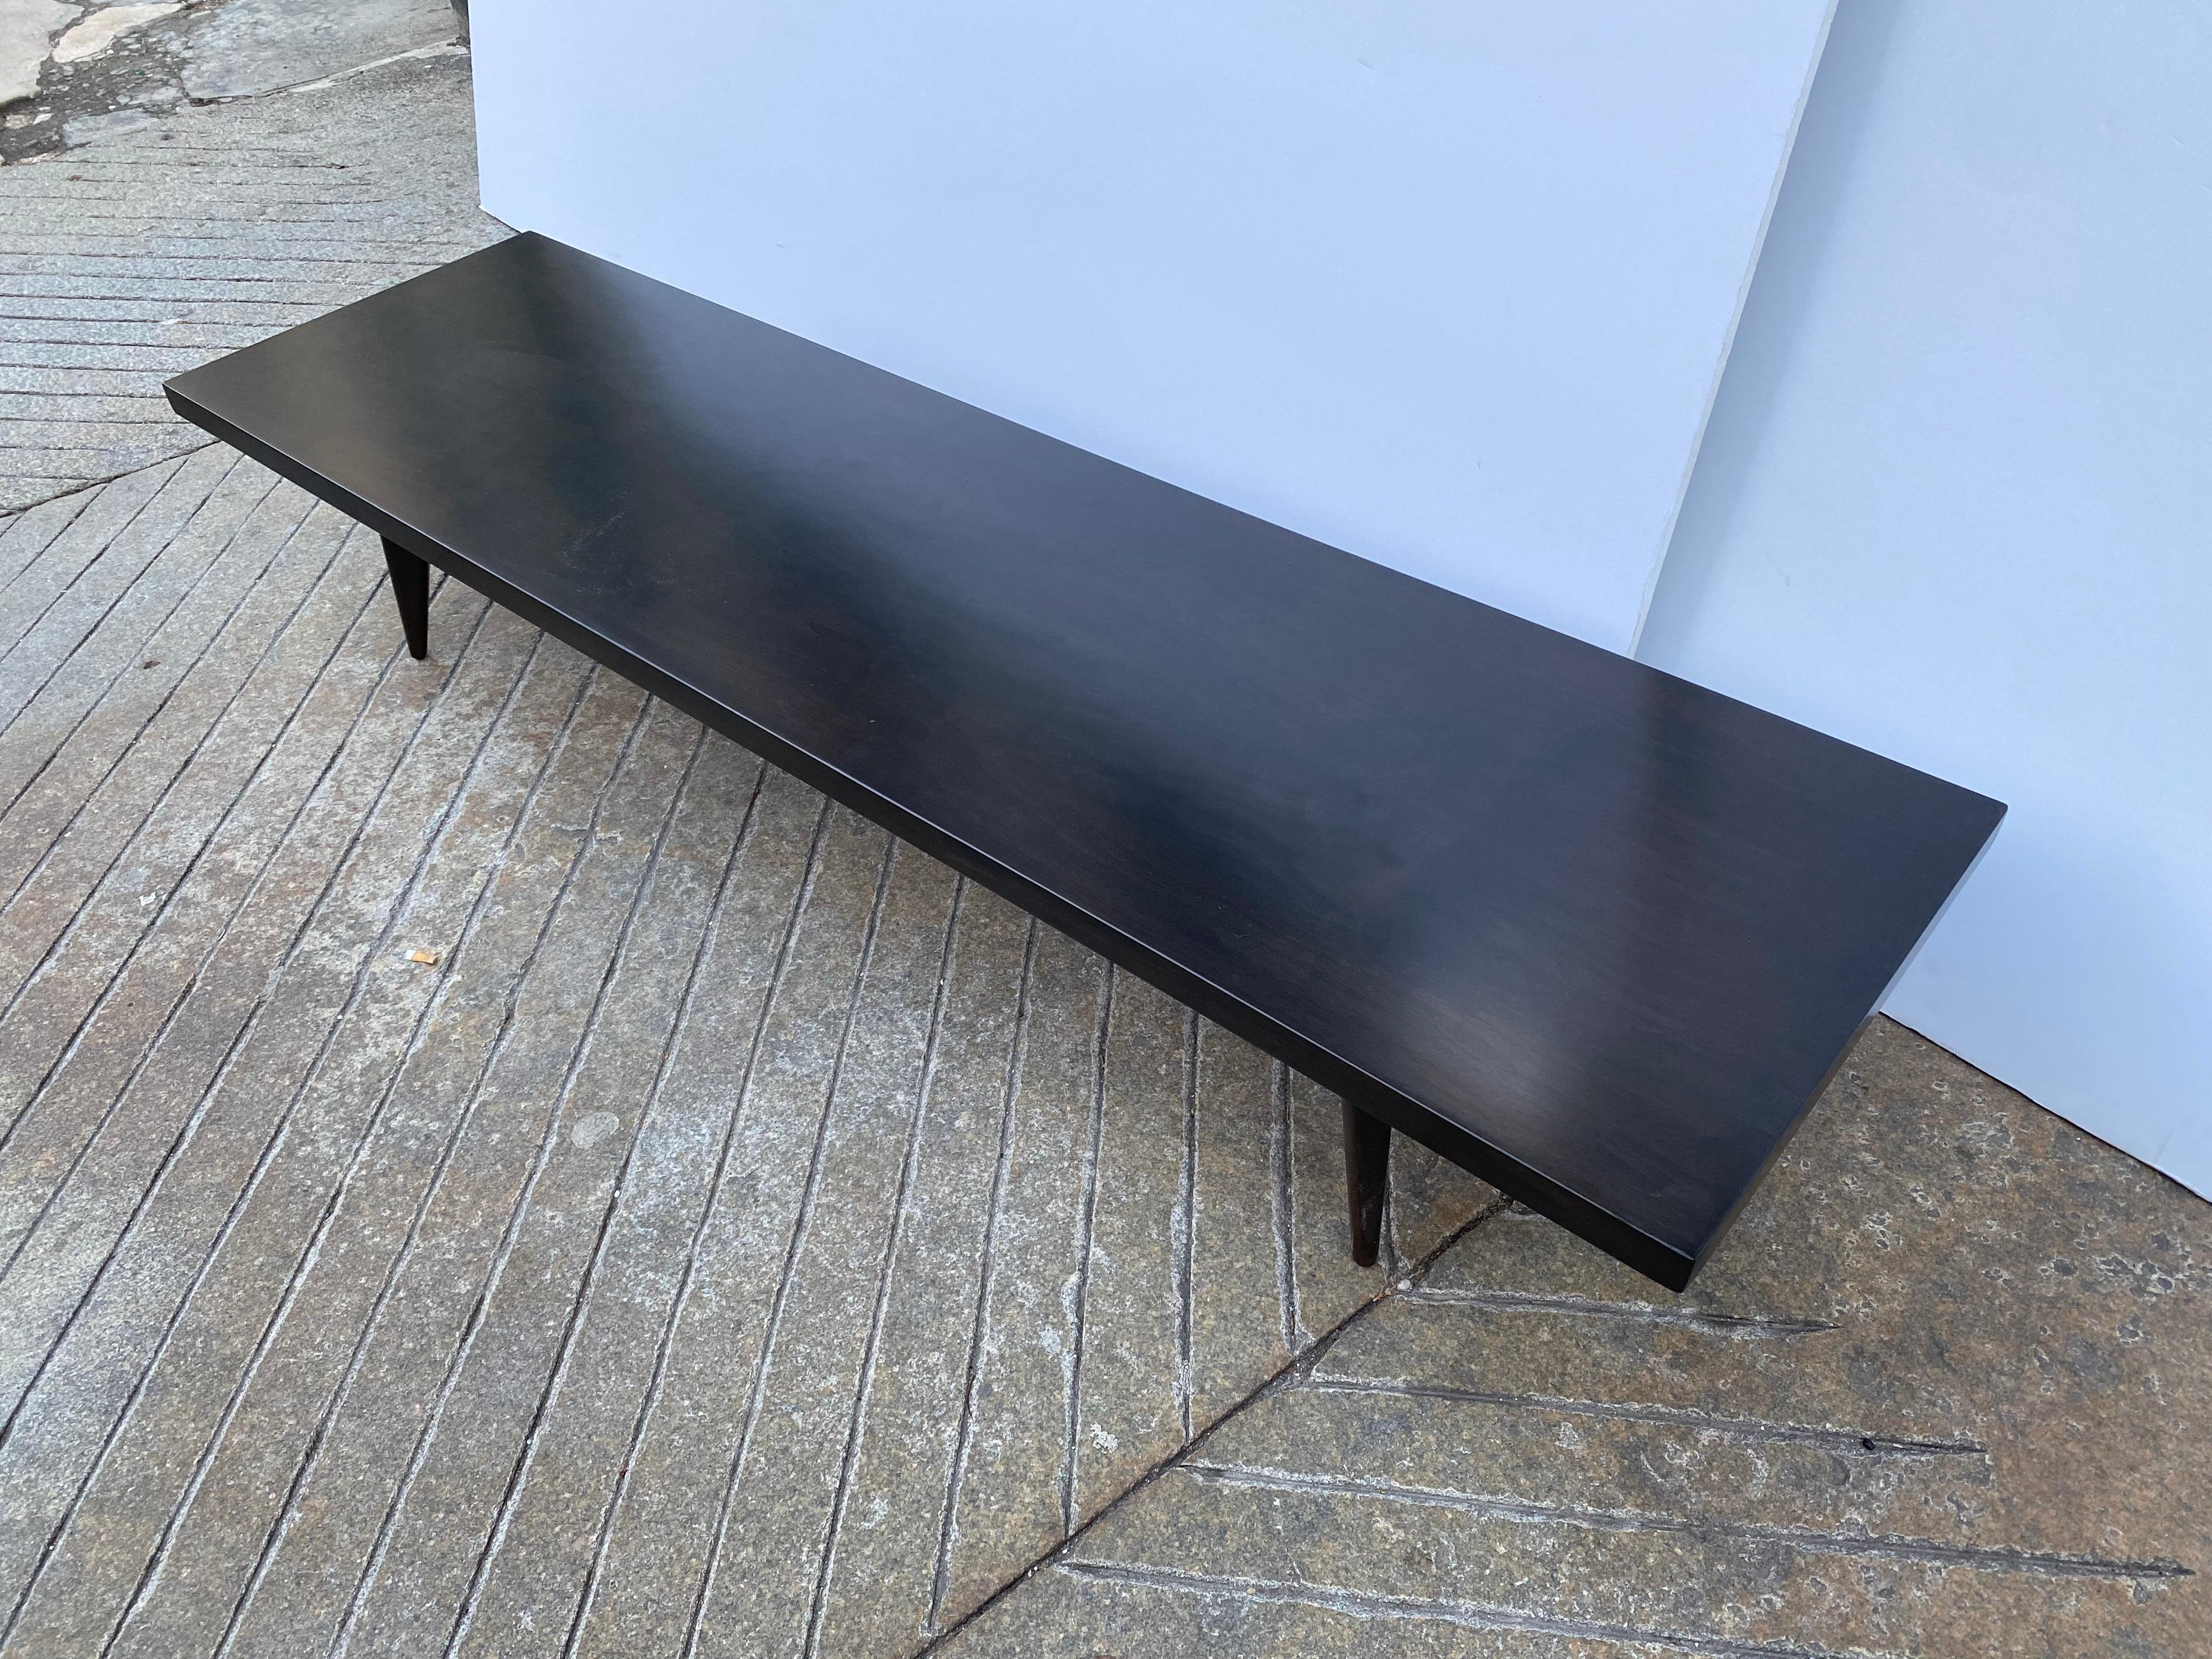 Wood Pair Sleek Low Tables/ Benches